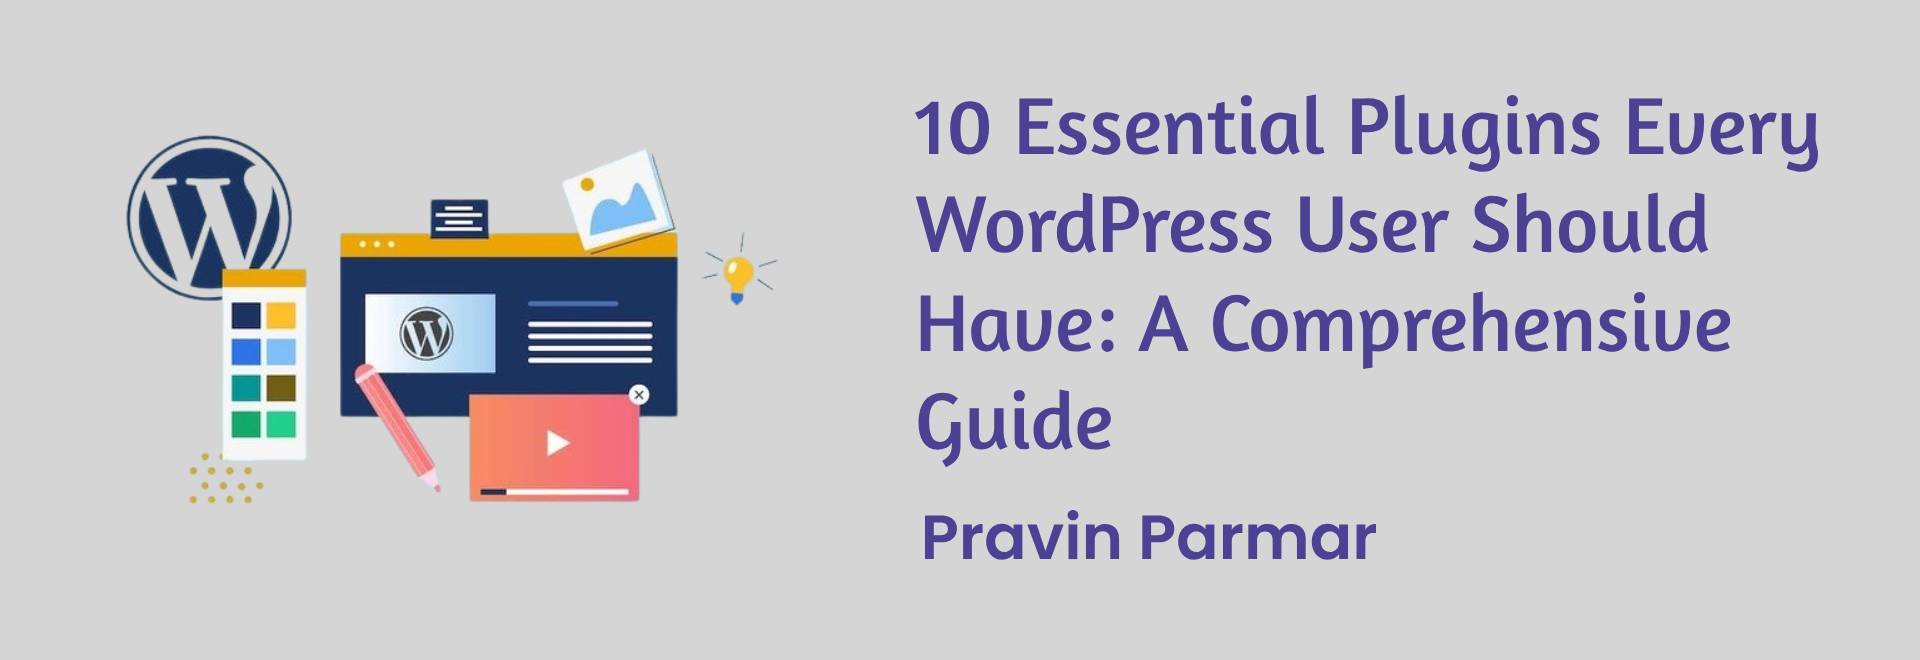 10 Essential Plugins Every WordPress User Should Have: A Comprehensive Guide